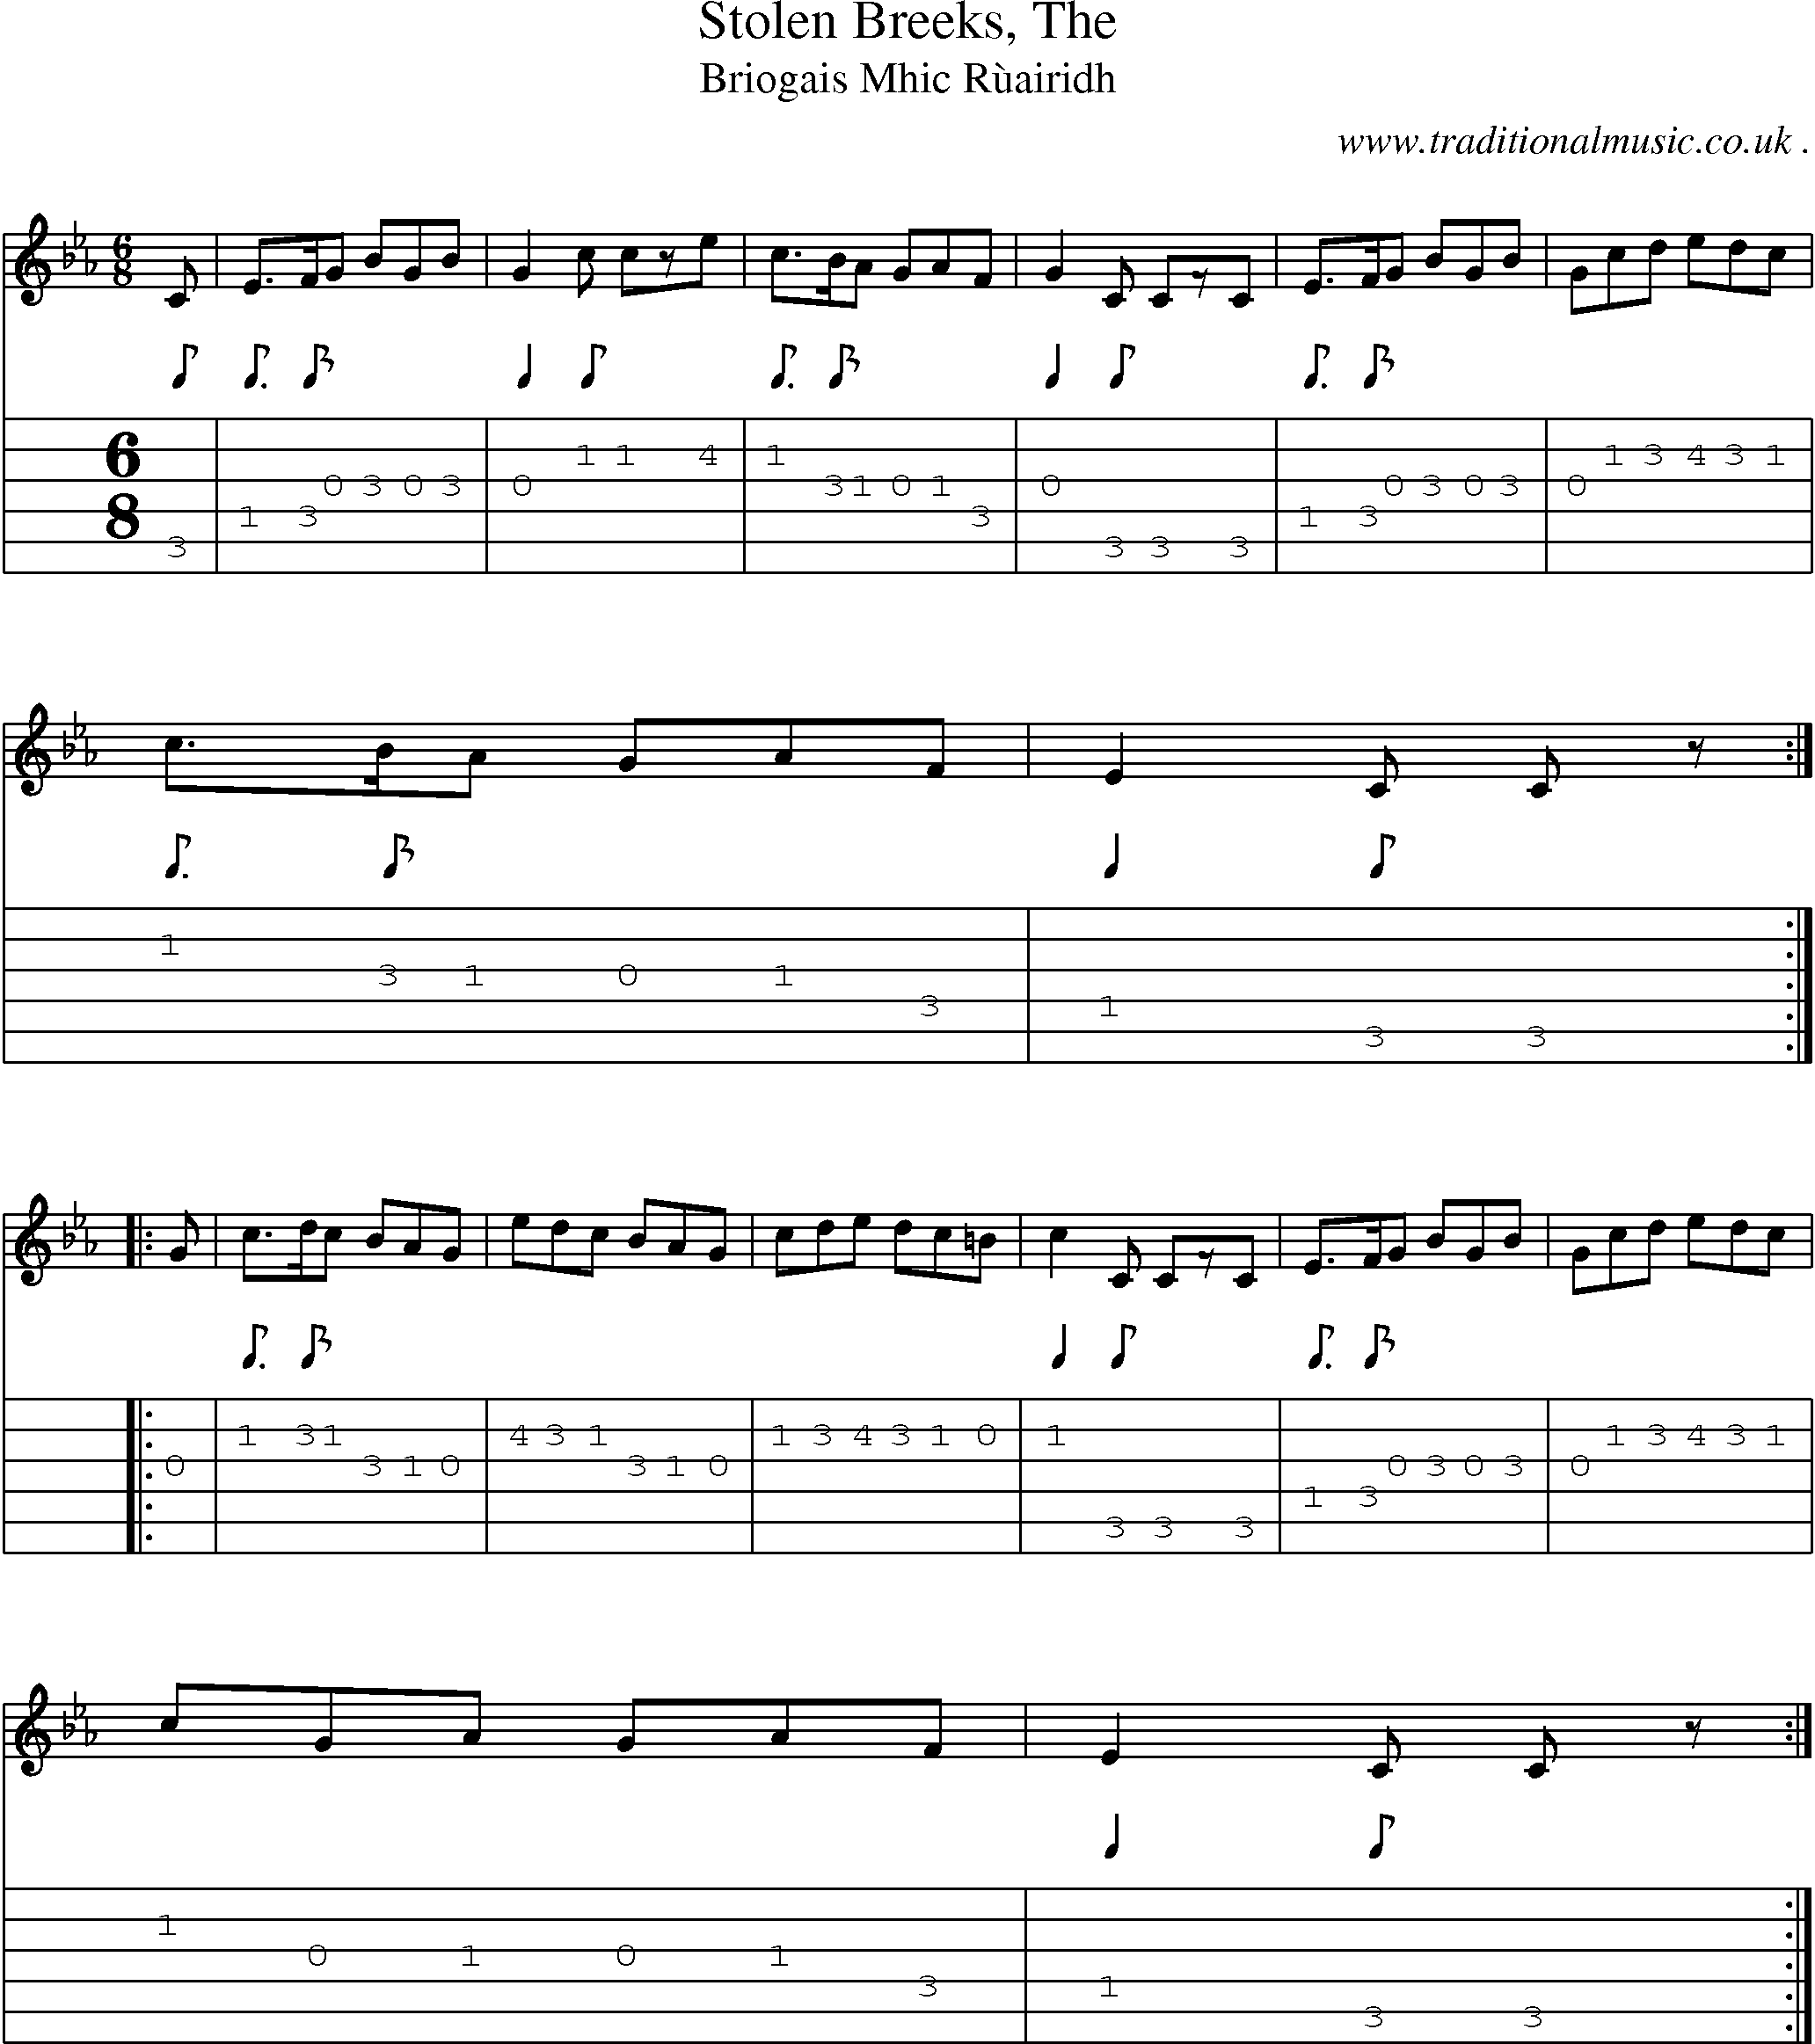 Sheet-music  score, Chords and Guitar Tabs for Stolen Breeks The